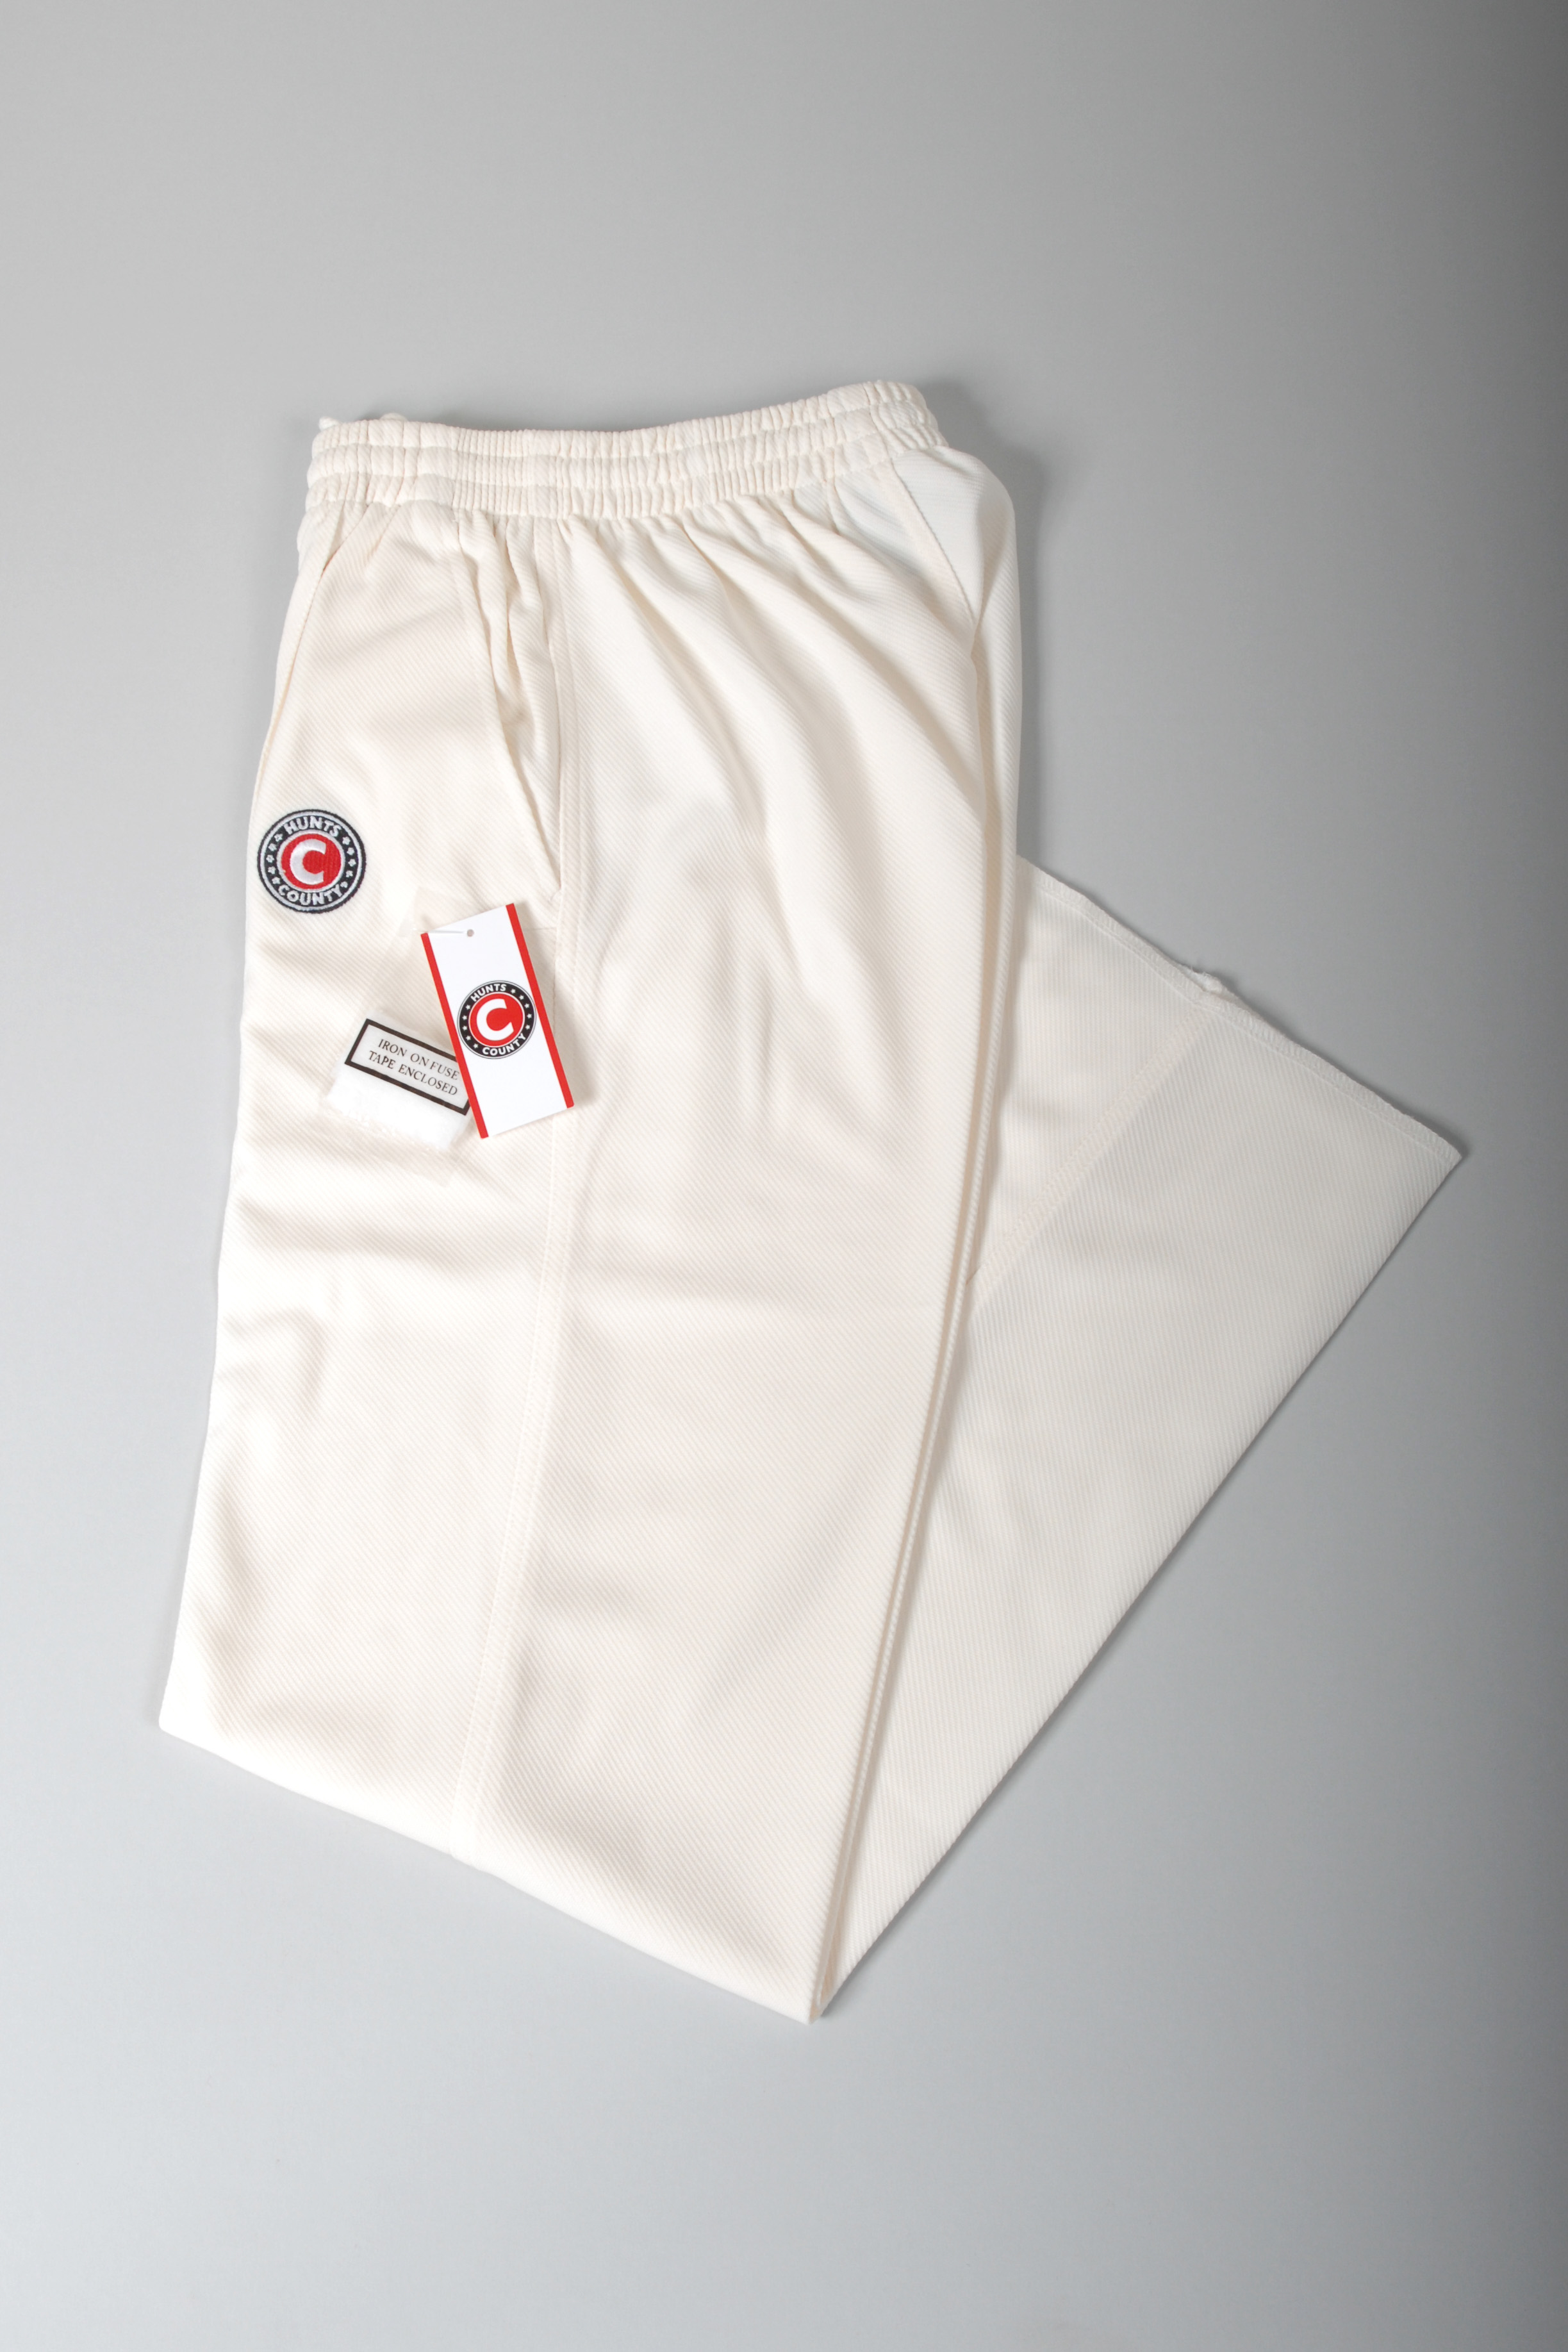 Cricket Trousers - 18/20"